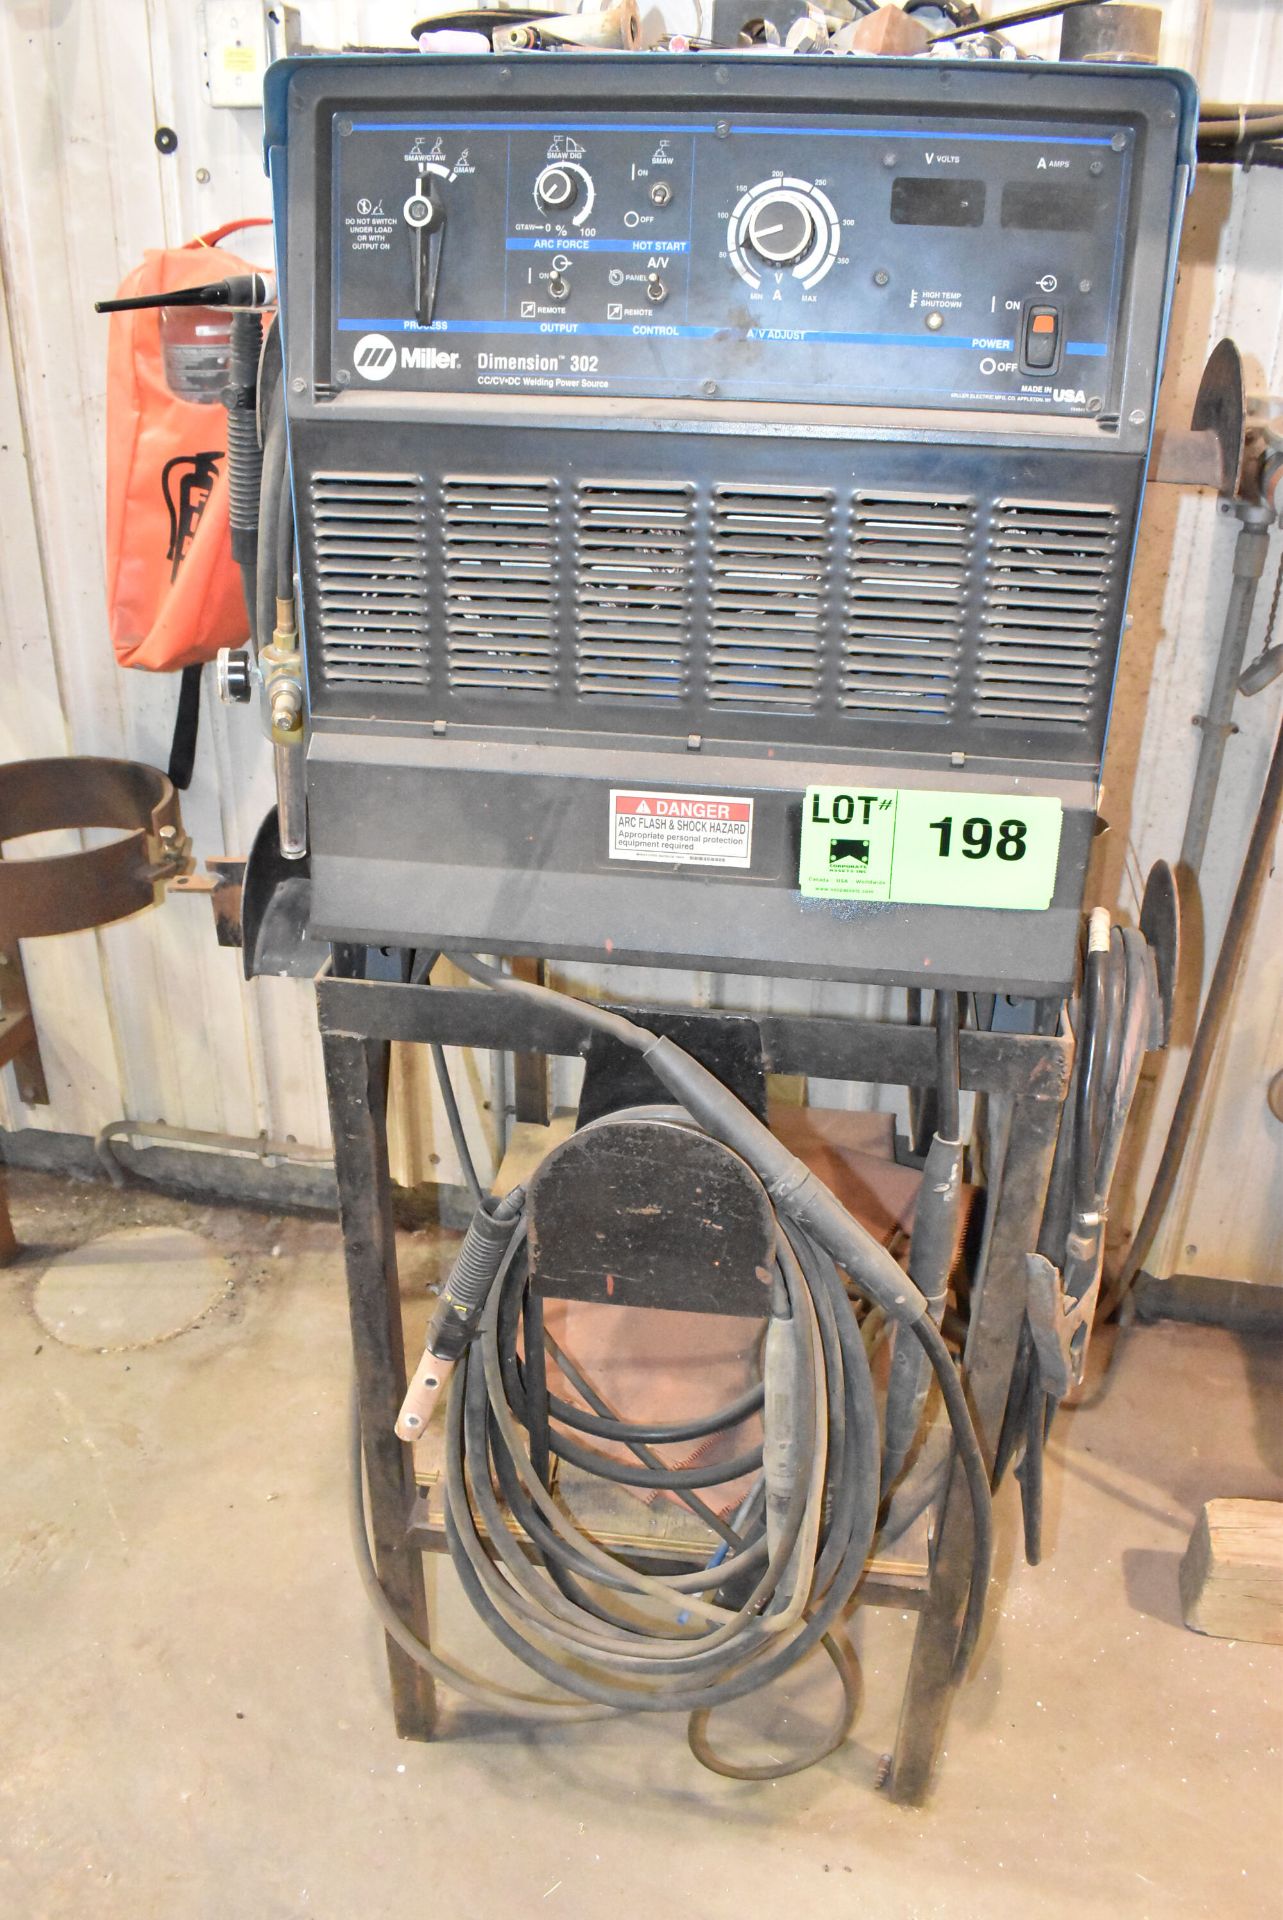 MILLER DIMENSION 302 CC/CV-DC TIG/ARC/MIG WELDER WITH CABLES AND GUN S/N LC444344 (CI) [RIGGING